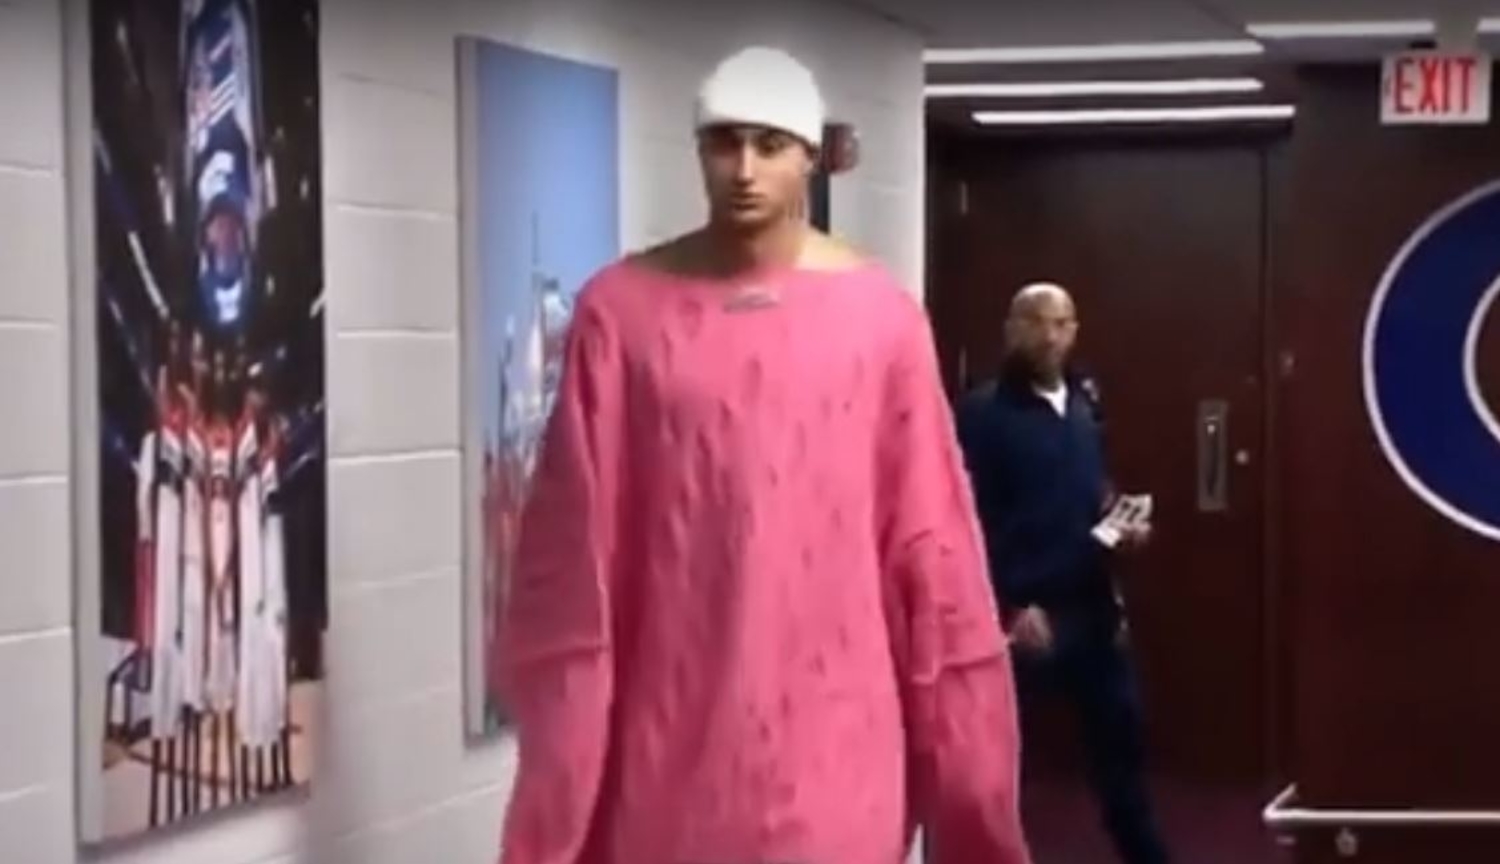 Kyle Kuzma's pregame outfit tonight included a jacket with mirrors.  Thoughts? 🤔